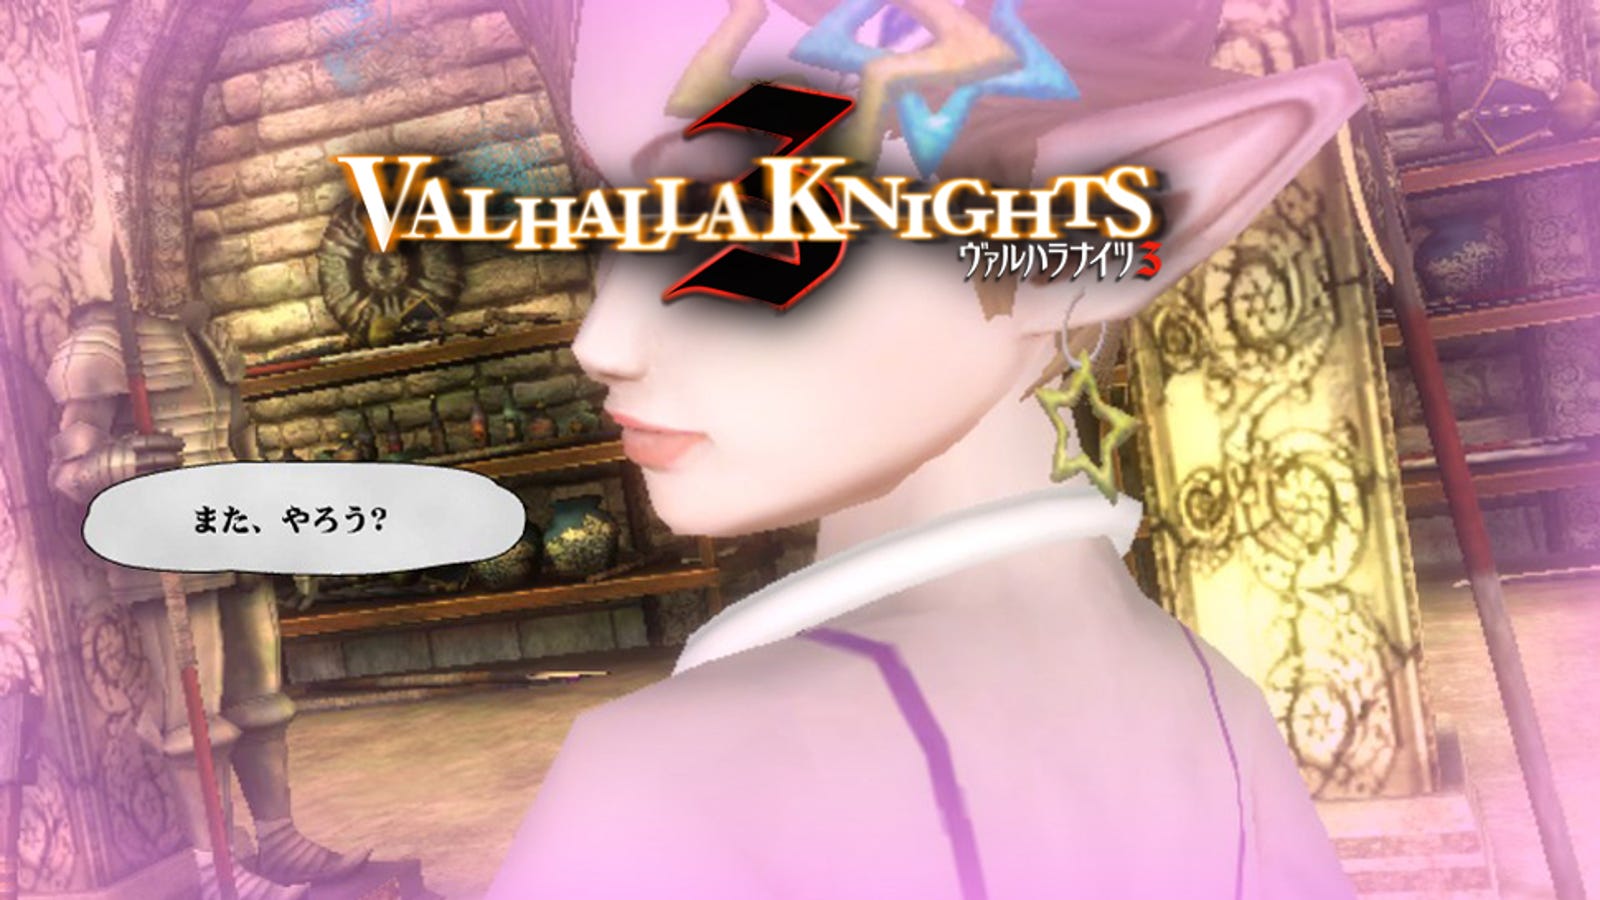 Free Nude Beach Games - Why I'm Avoiding One of the Main Features of Valhalla Knights 3